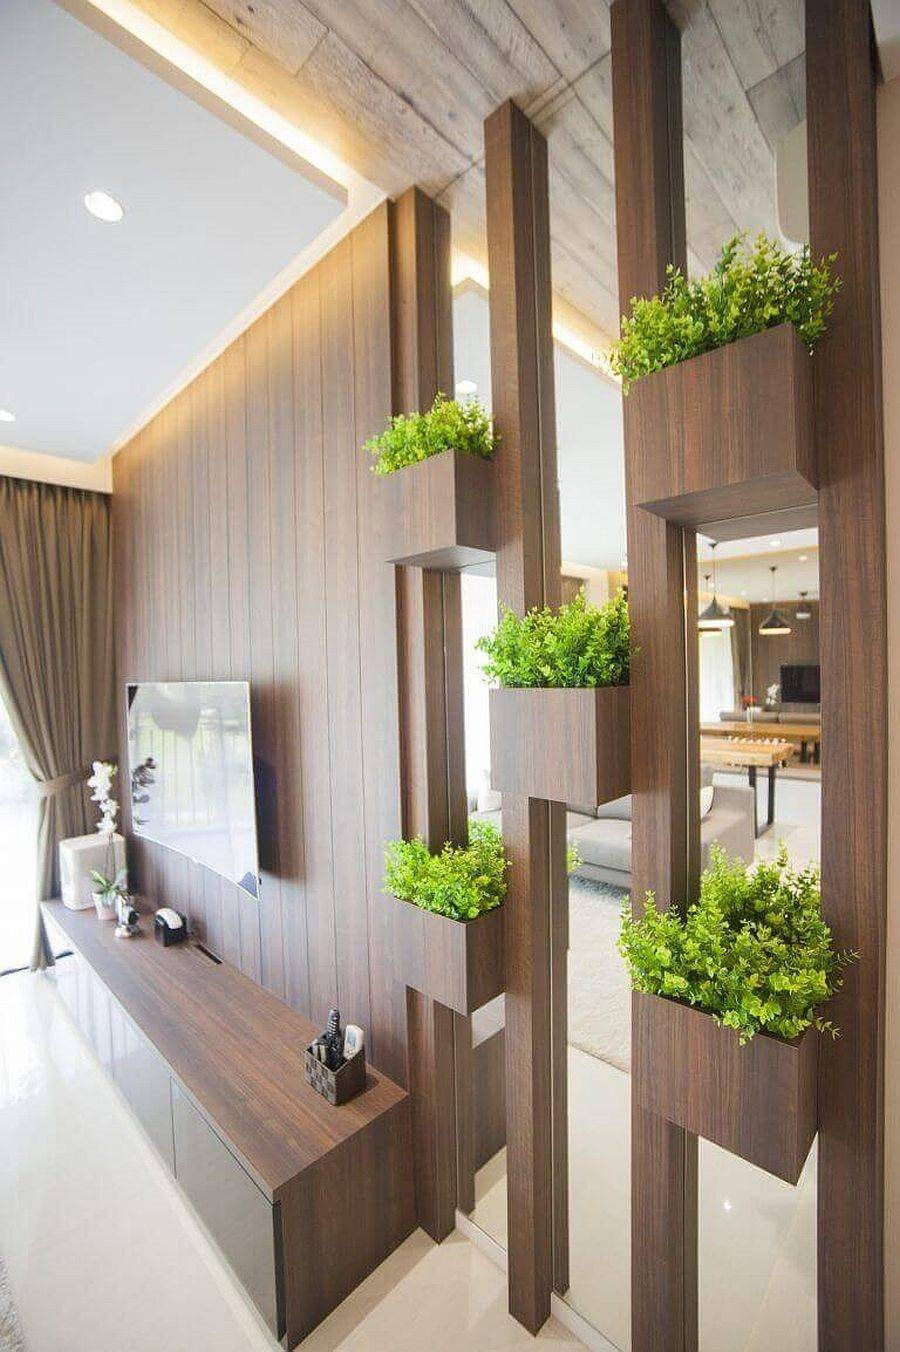 add-a-bit-of-greenery-to-your-home-with-a-trendy-creative-room-divider-23014.jpg